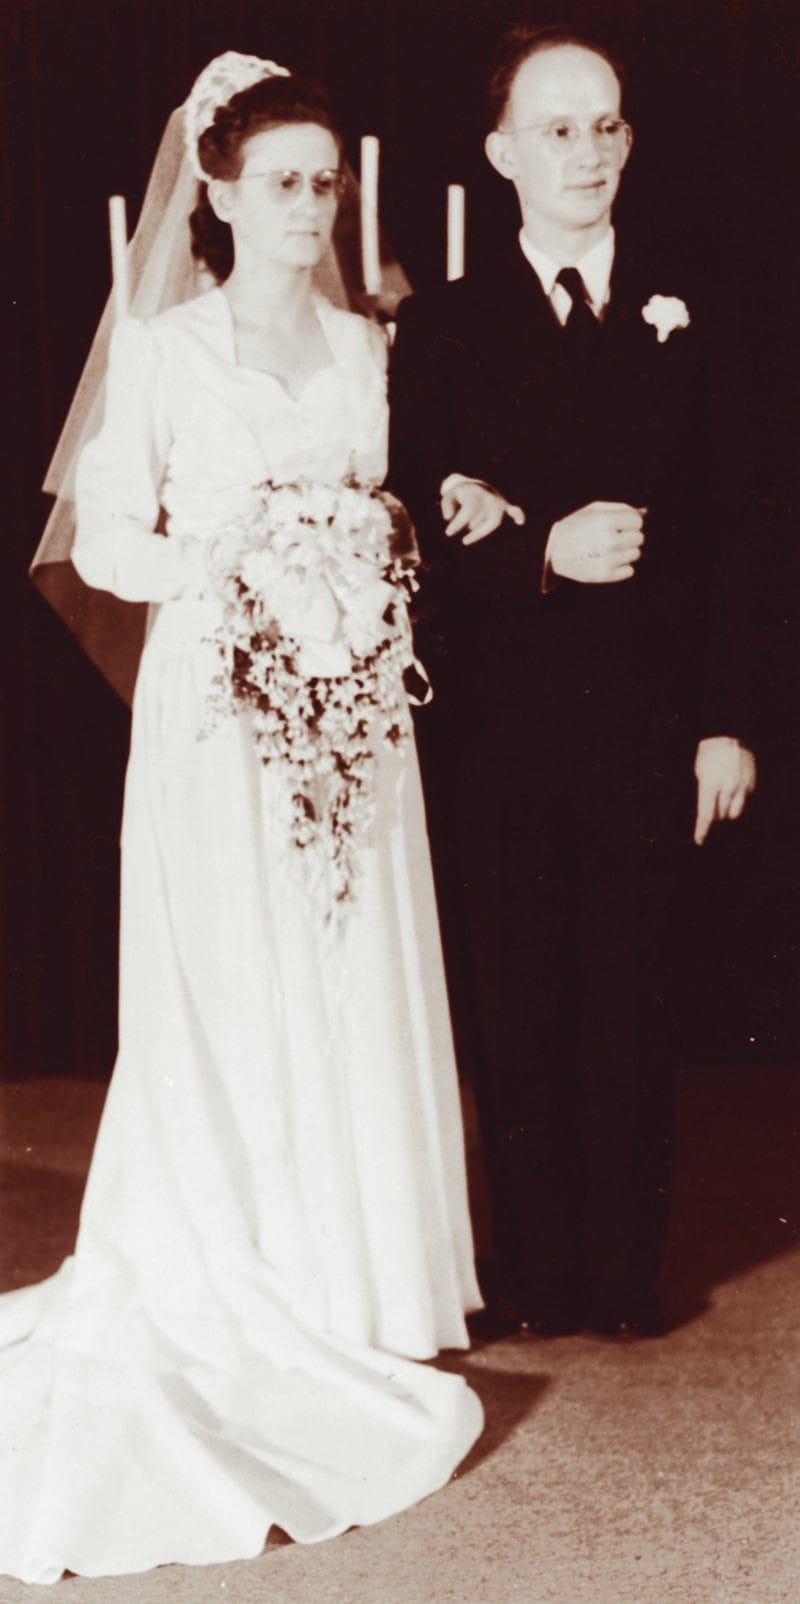 PUC has helped bring together couples since it was founded in 1882. Here is the wedding of Lyle McCoy (class of 1945) and Ruth Hansen (class of 1942). (PUC)